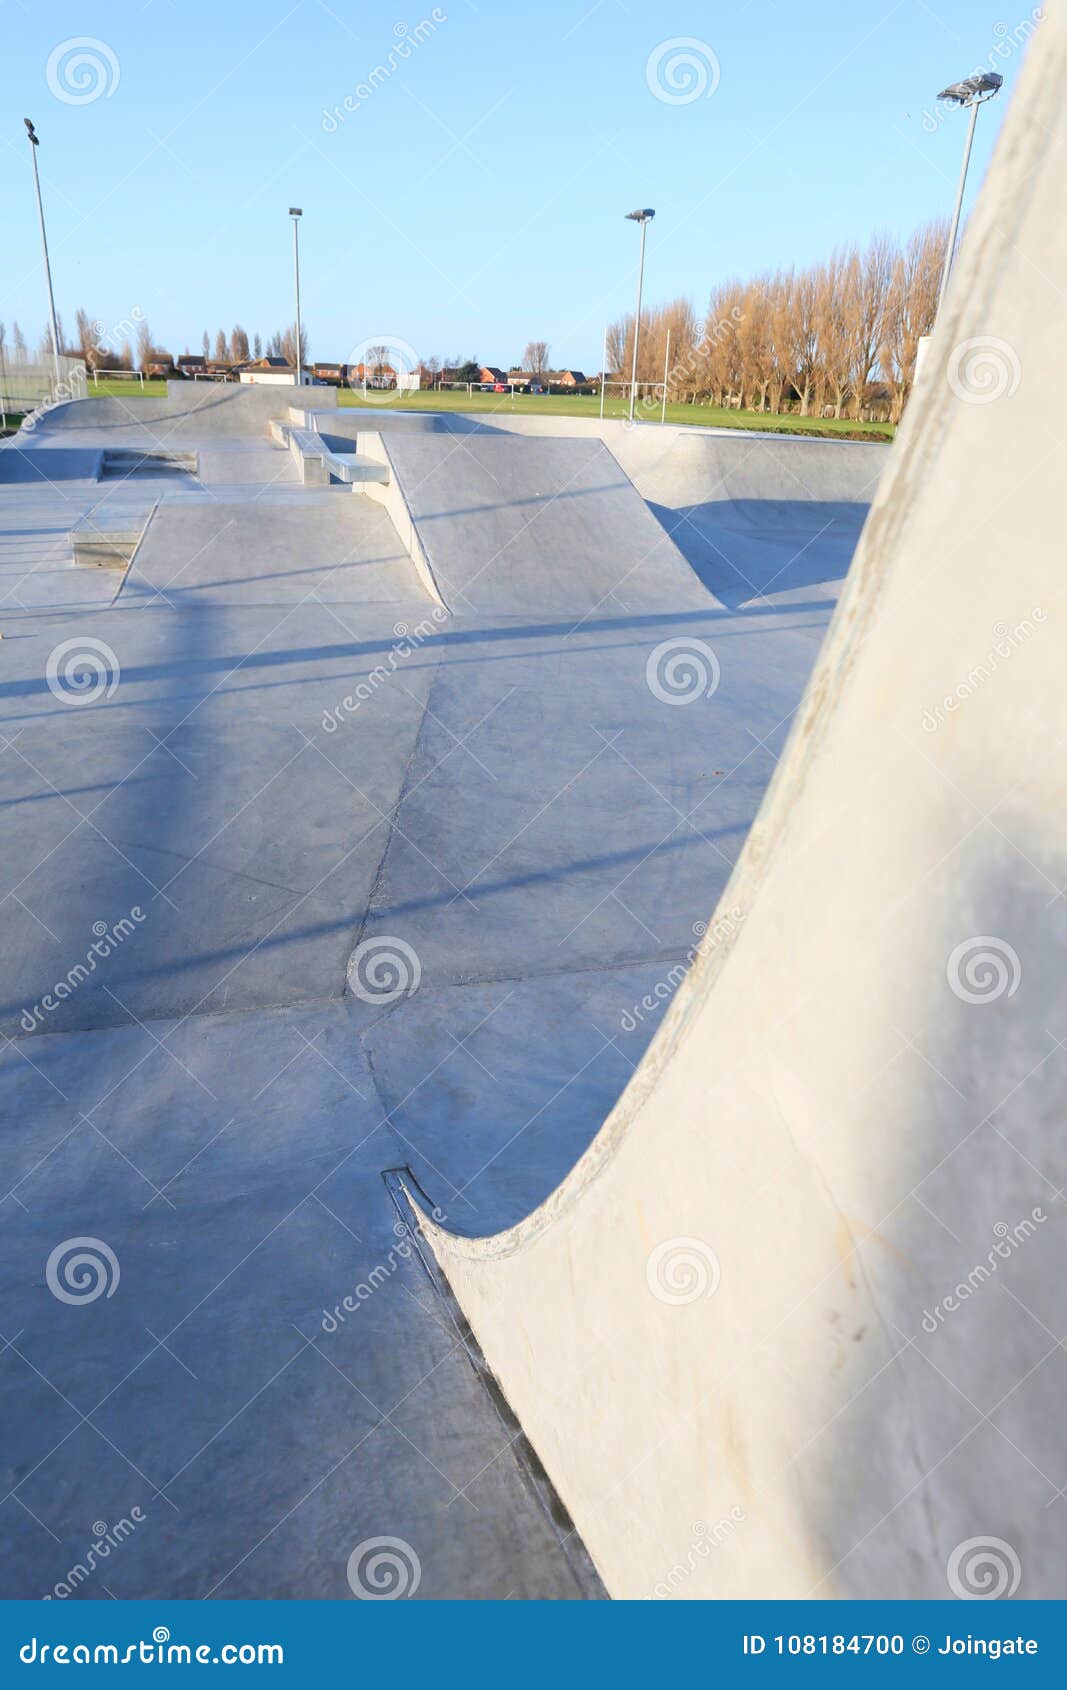 generic skatepark ramps high view to show scale